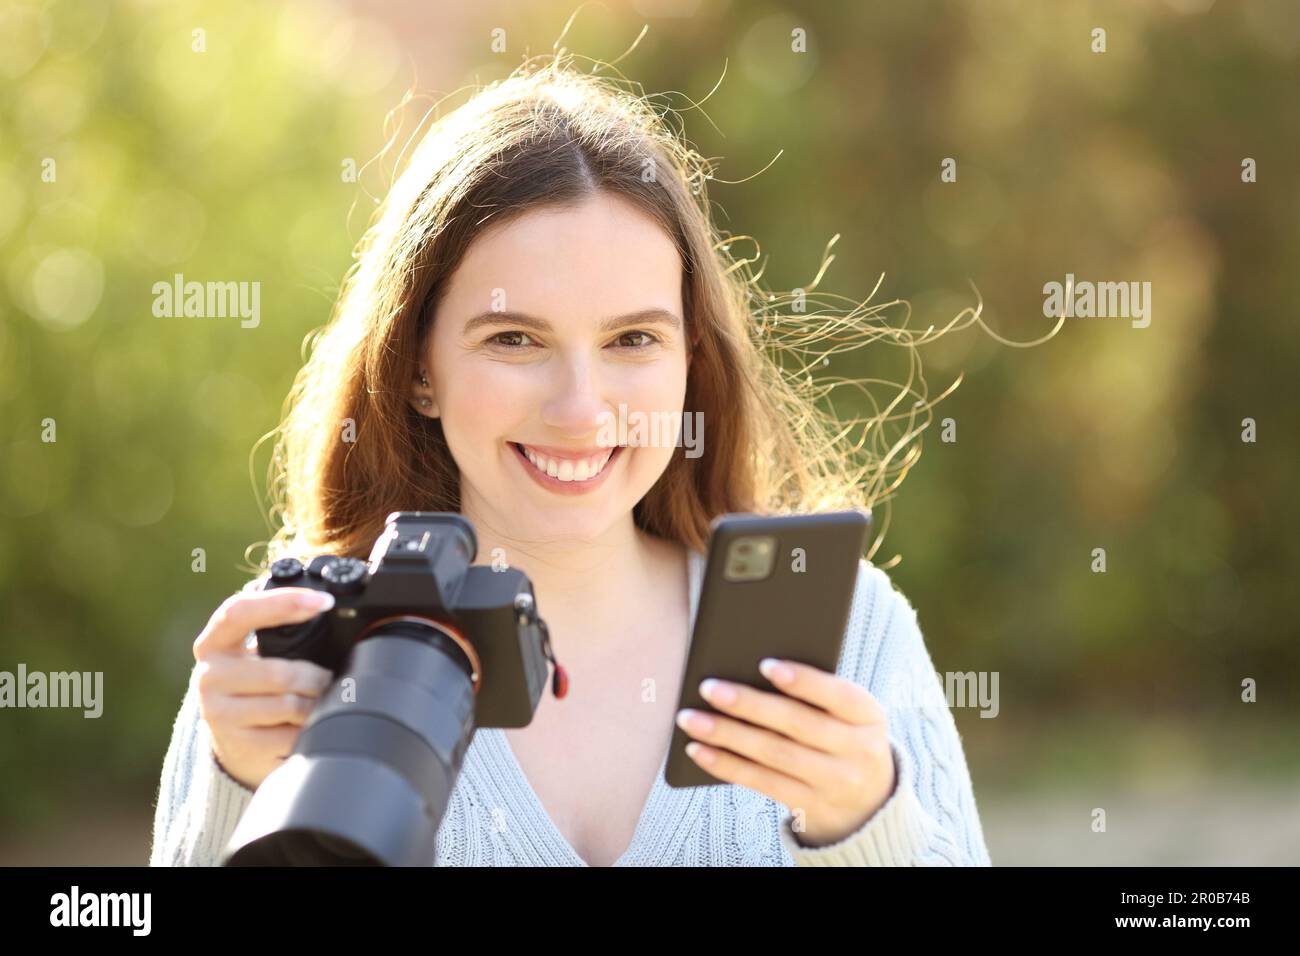 Happy photographer looks at you holding cell phone and mirrorless camera in a park Stock Photo